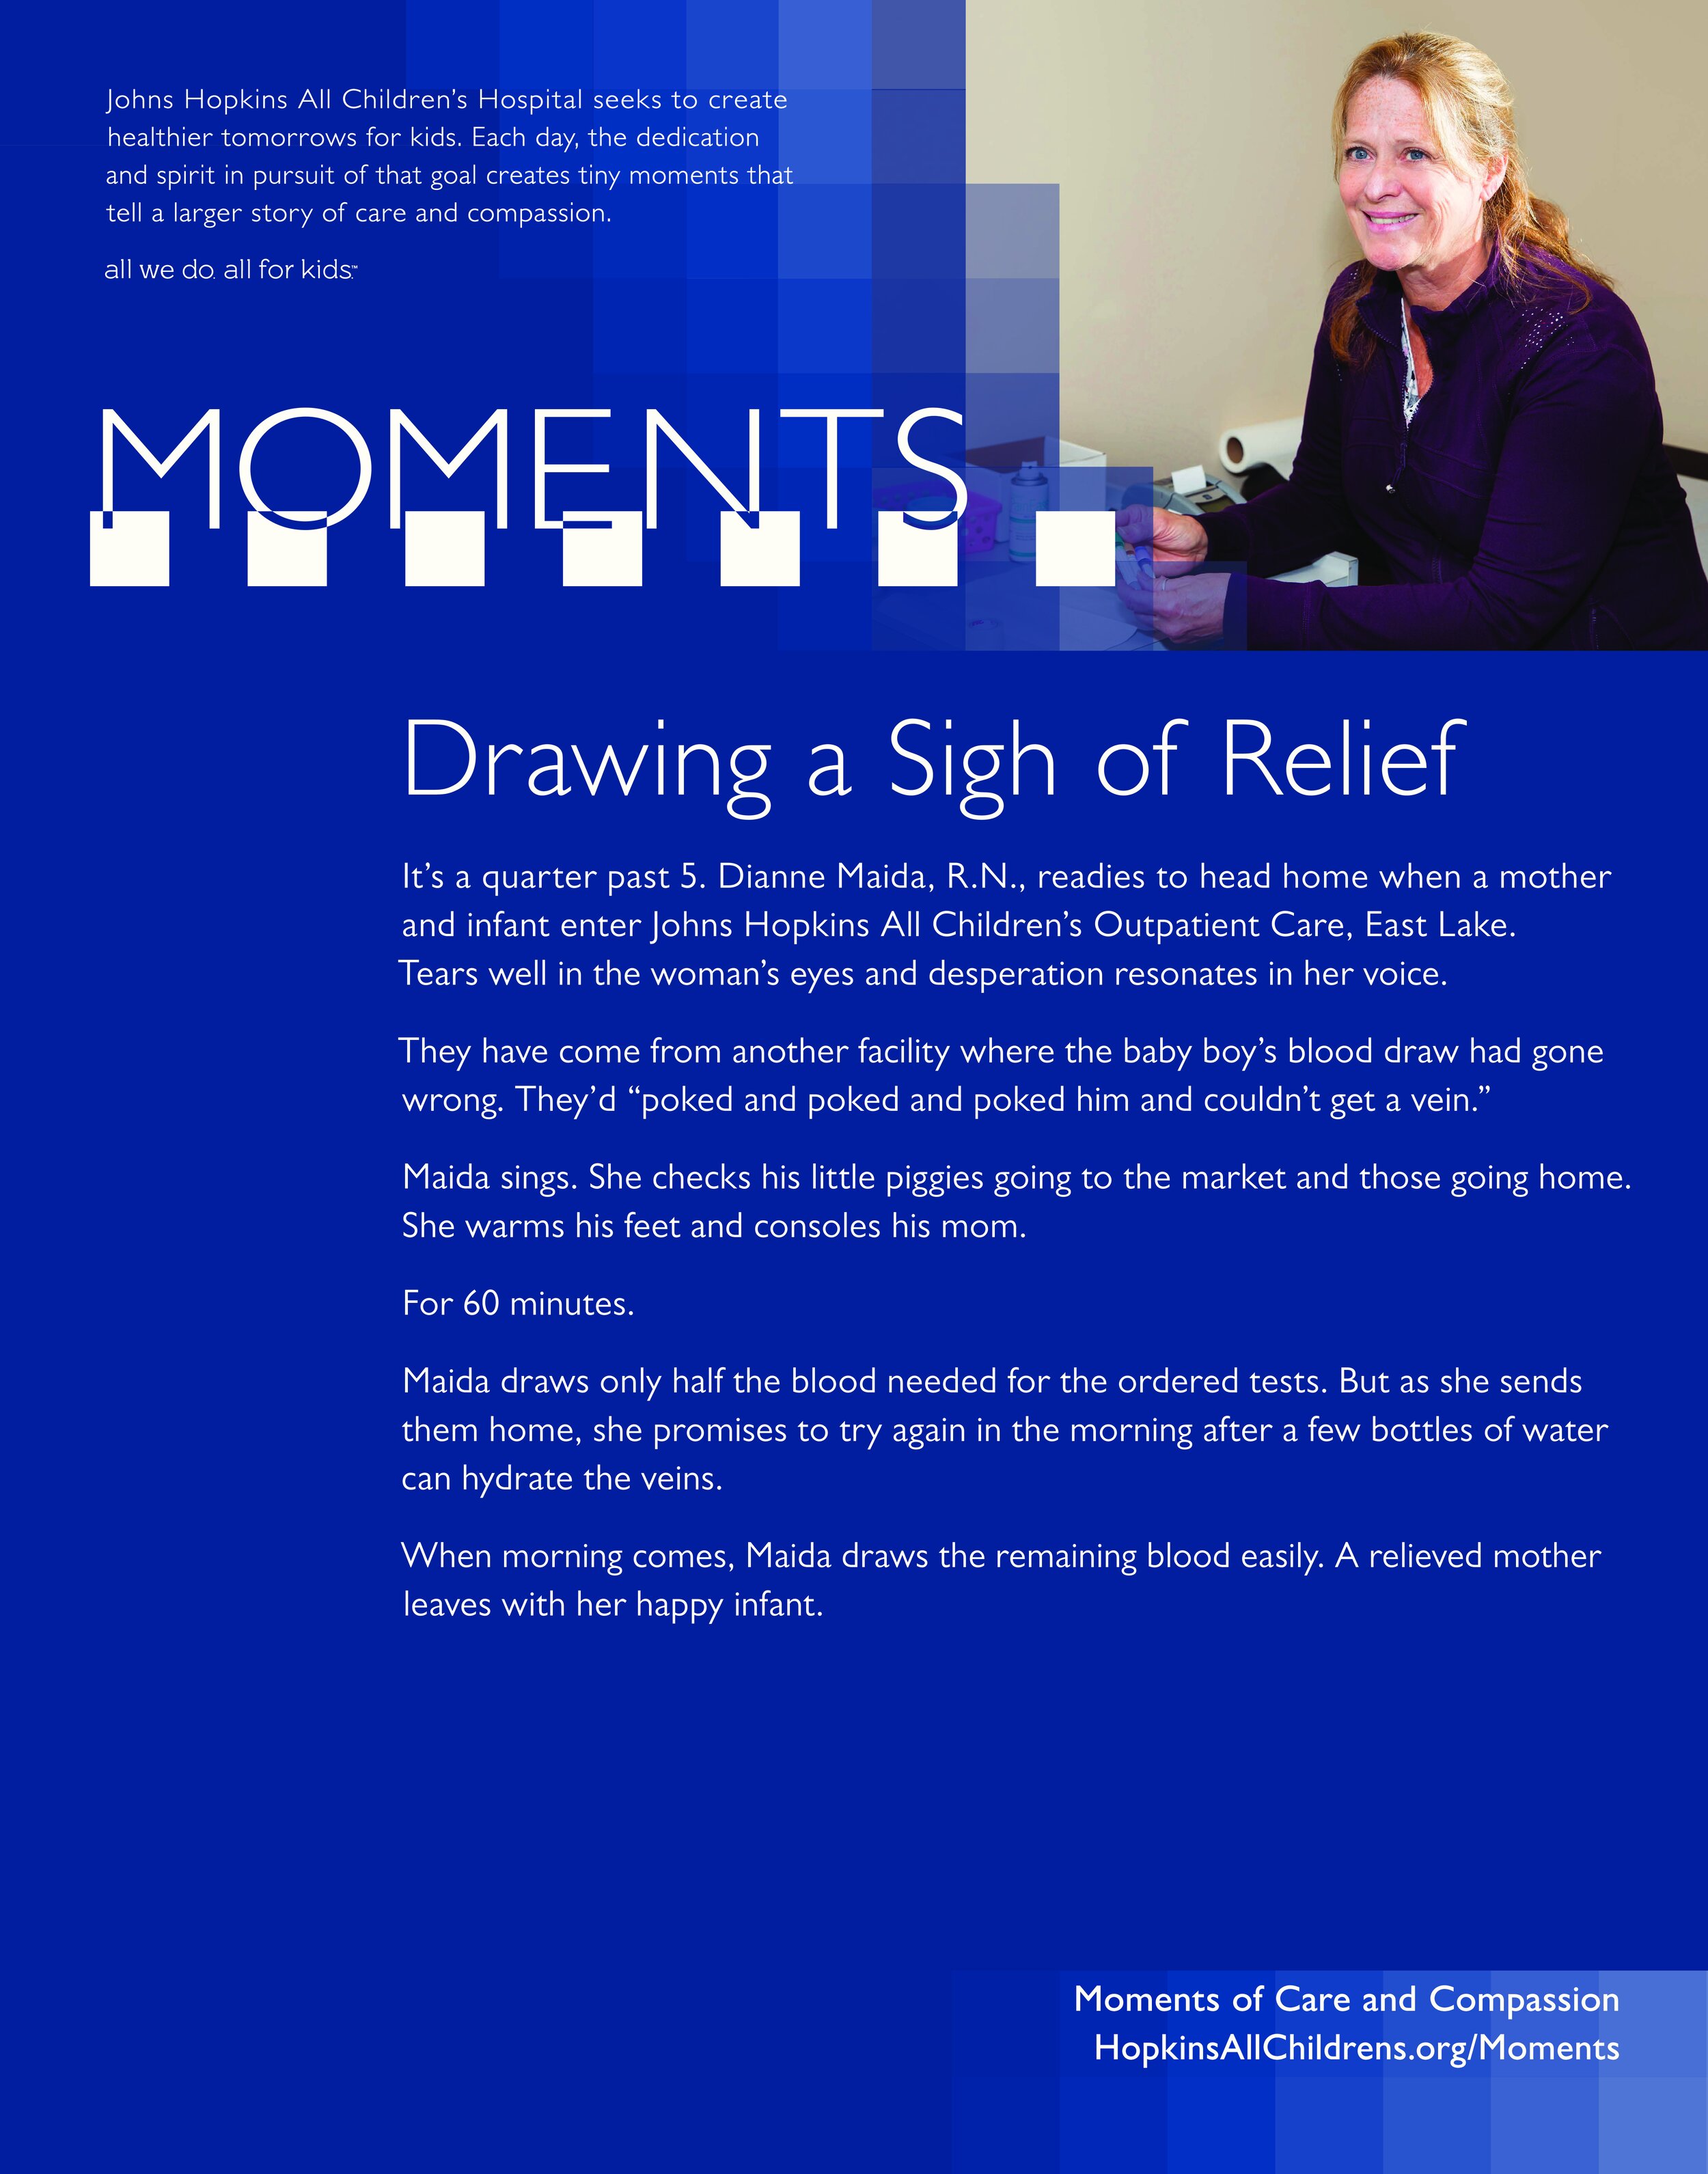 Moments Posters_Drawing a Sigh of Relief-page-0.jpg